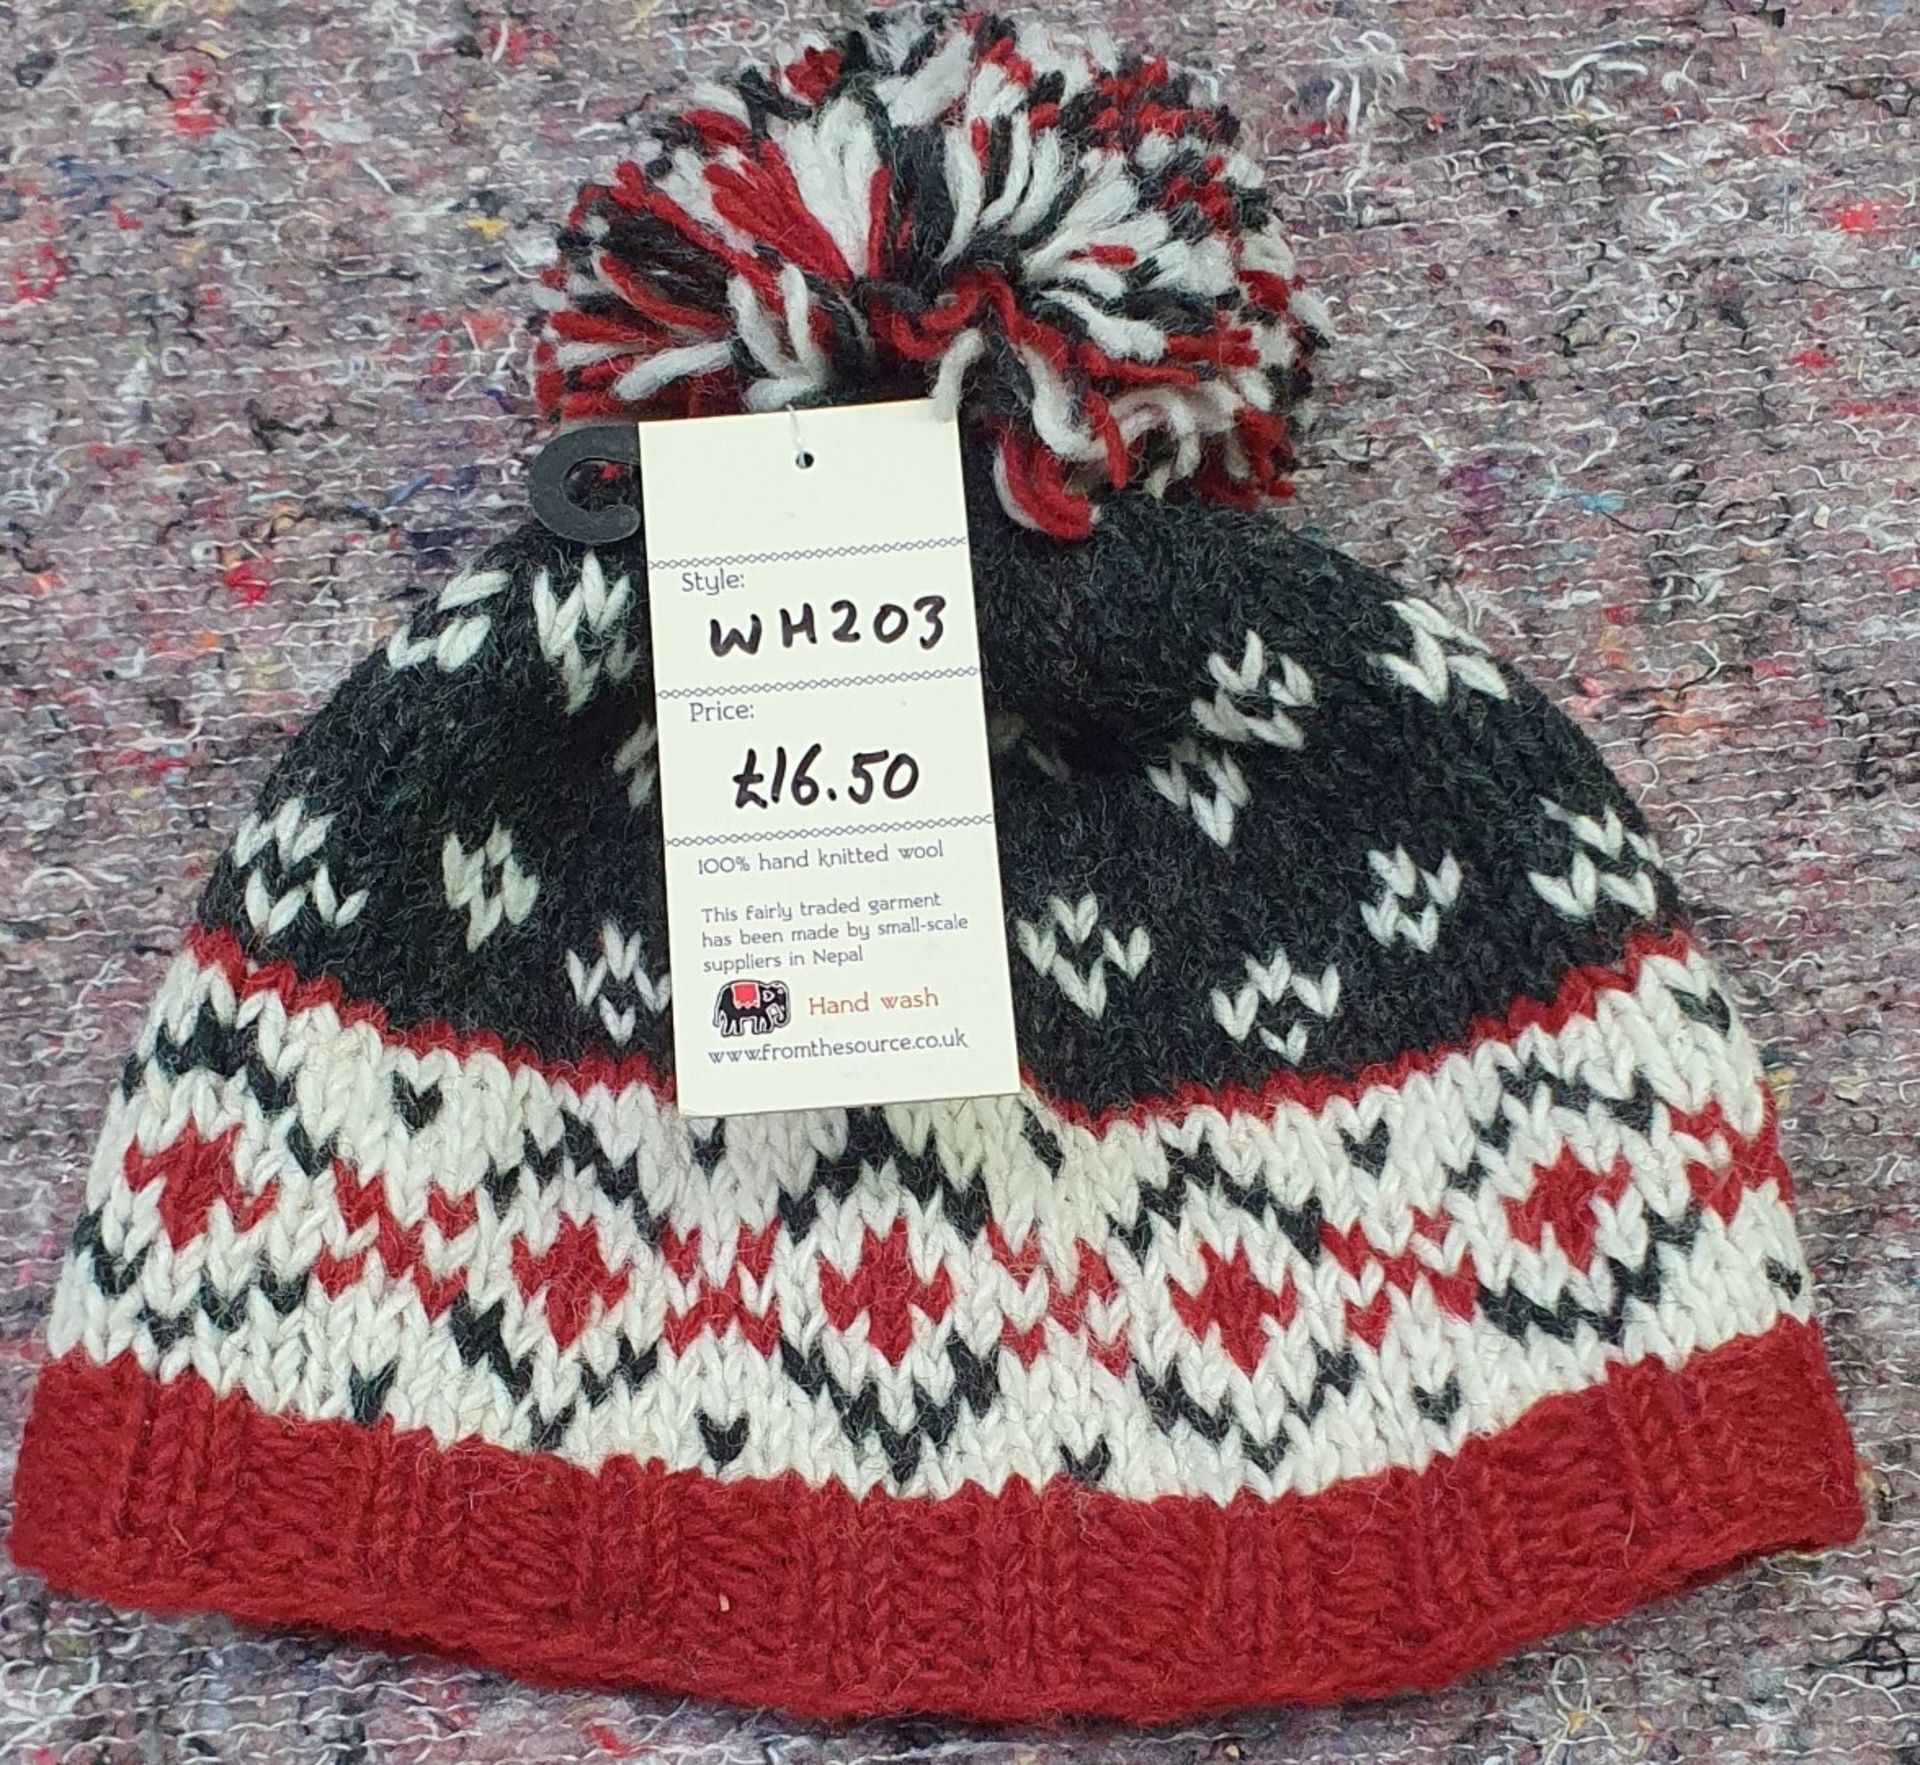 13 x Assorted Bobble Hats and Woolly Gloves by From The Source - New Stock - Ref: TCH236 - CL840 - - Image 11 of 24